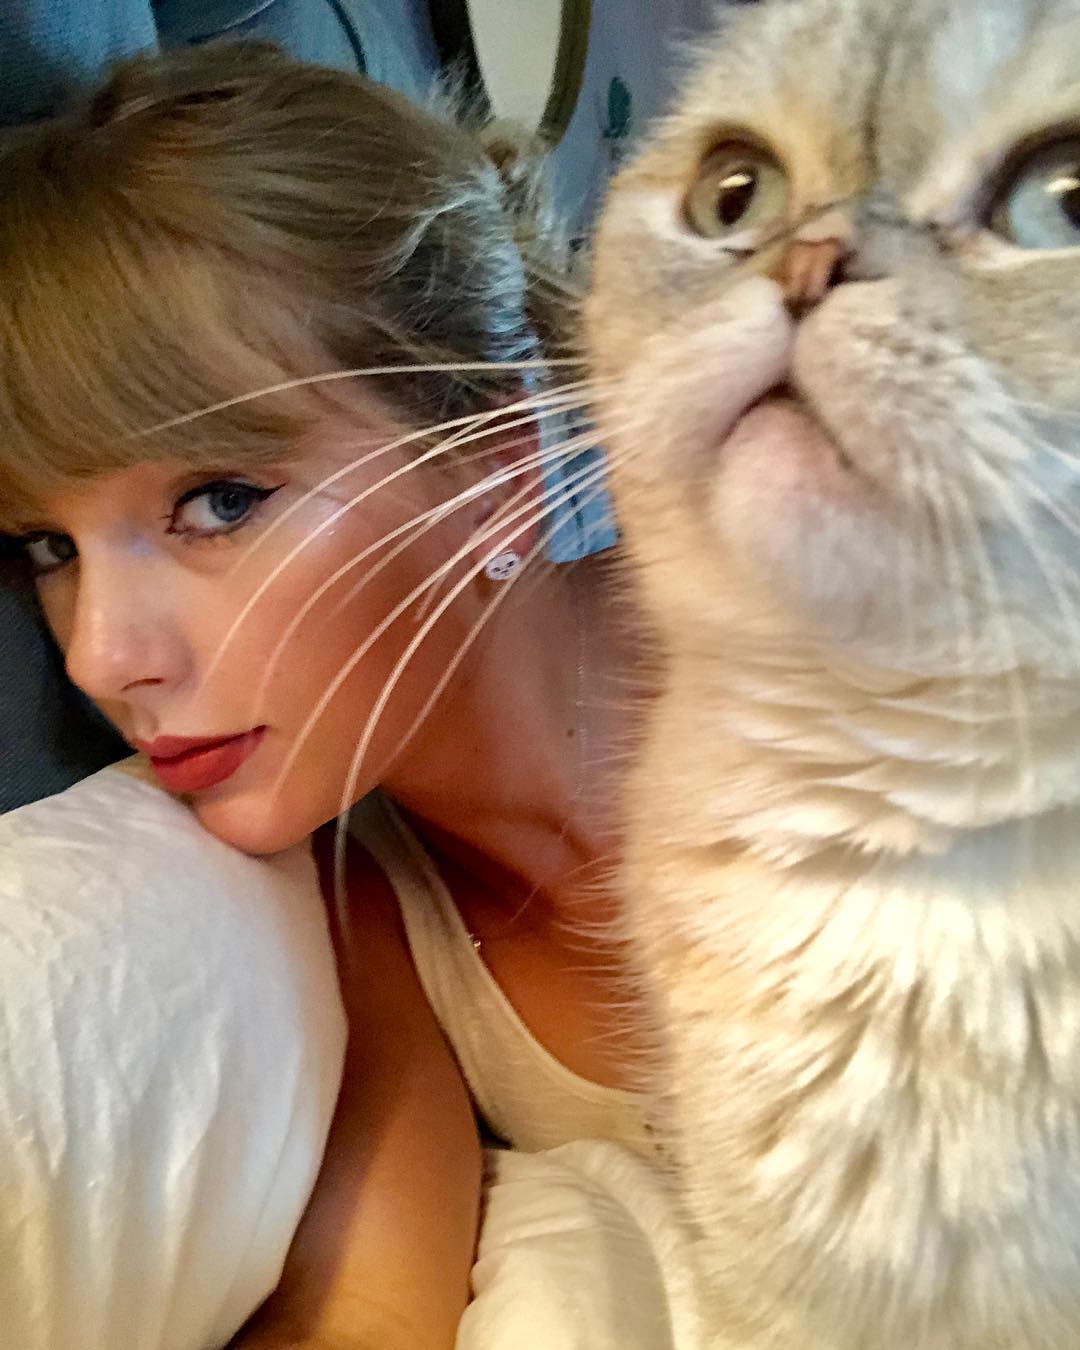 Guide to Taylor Swift's Cats — Meredith, Olivia and Benjamin